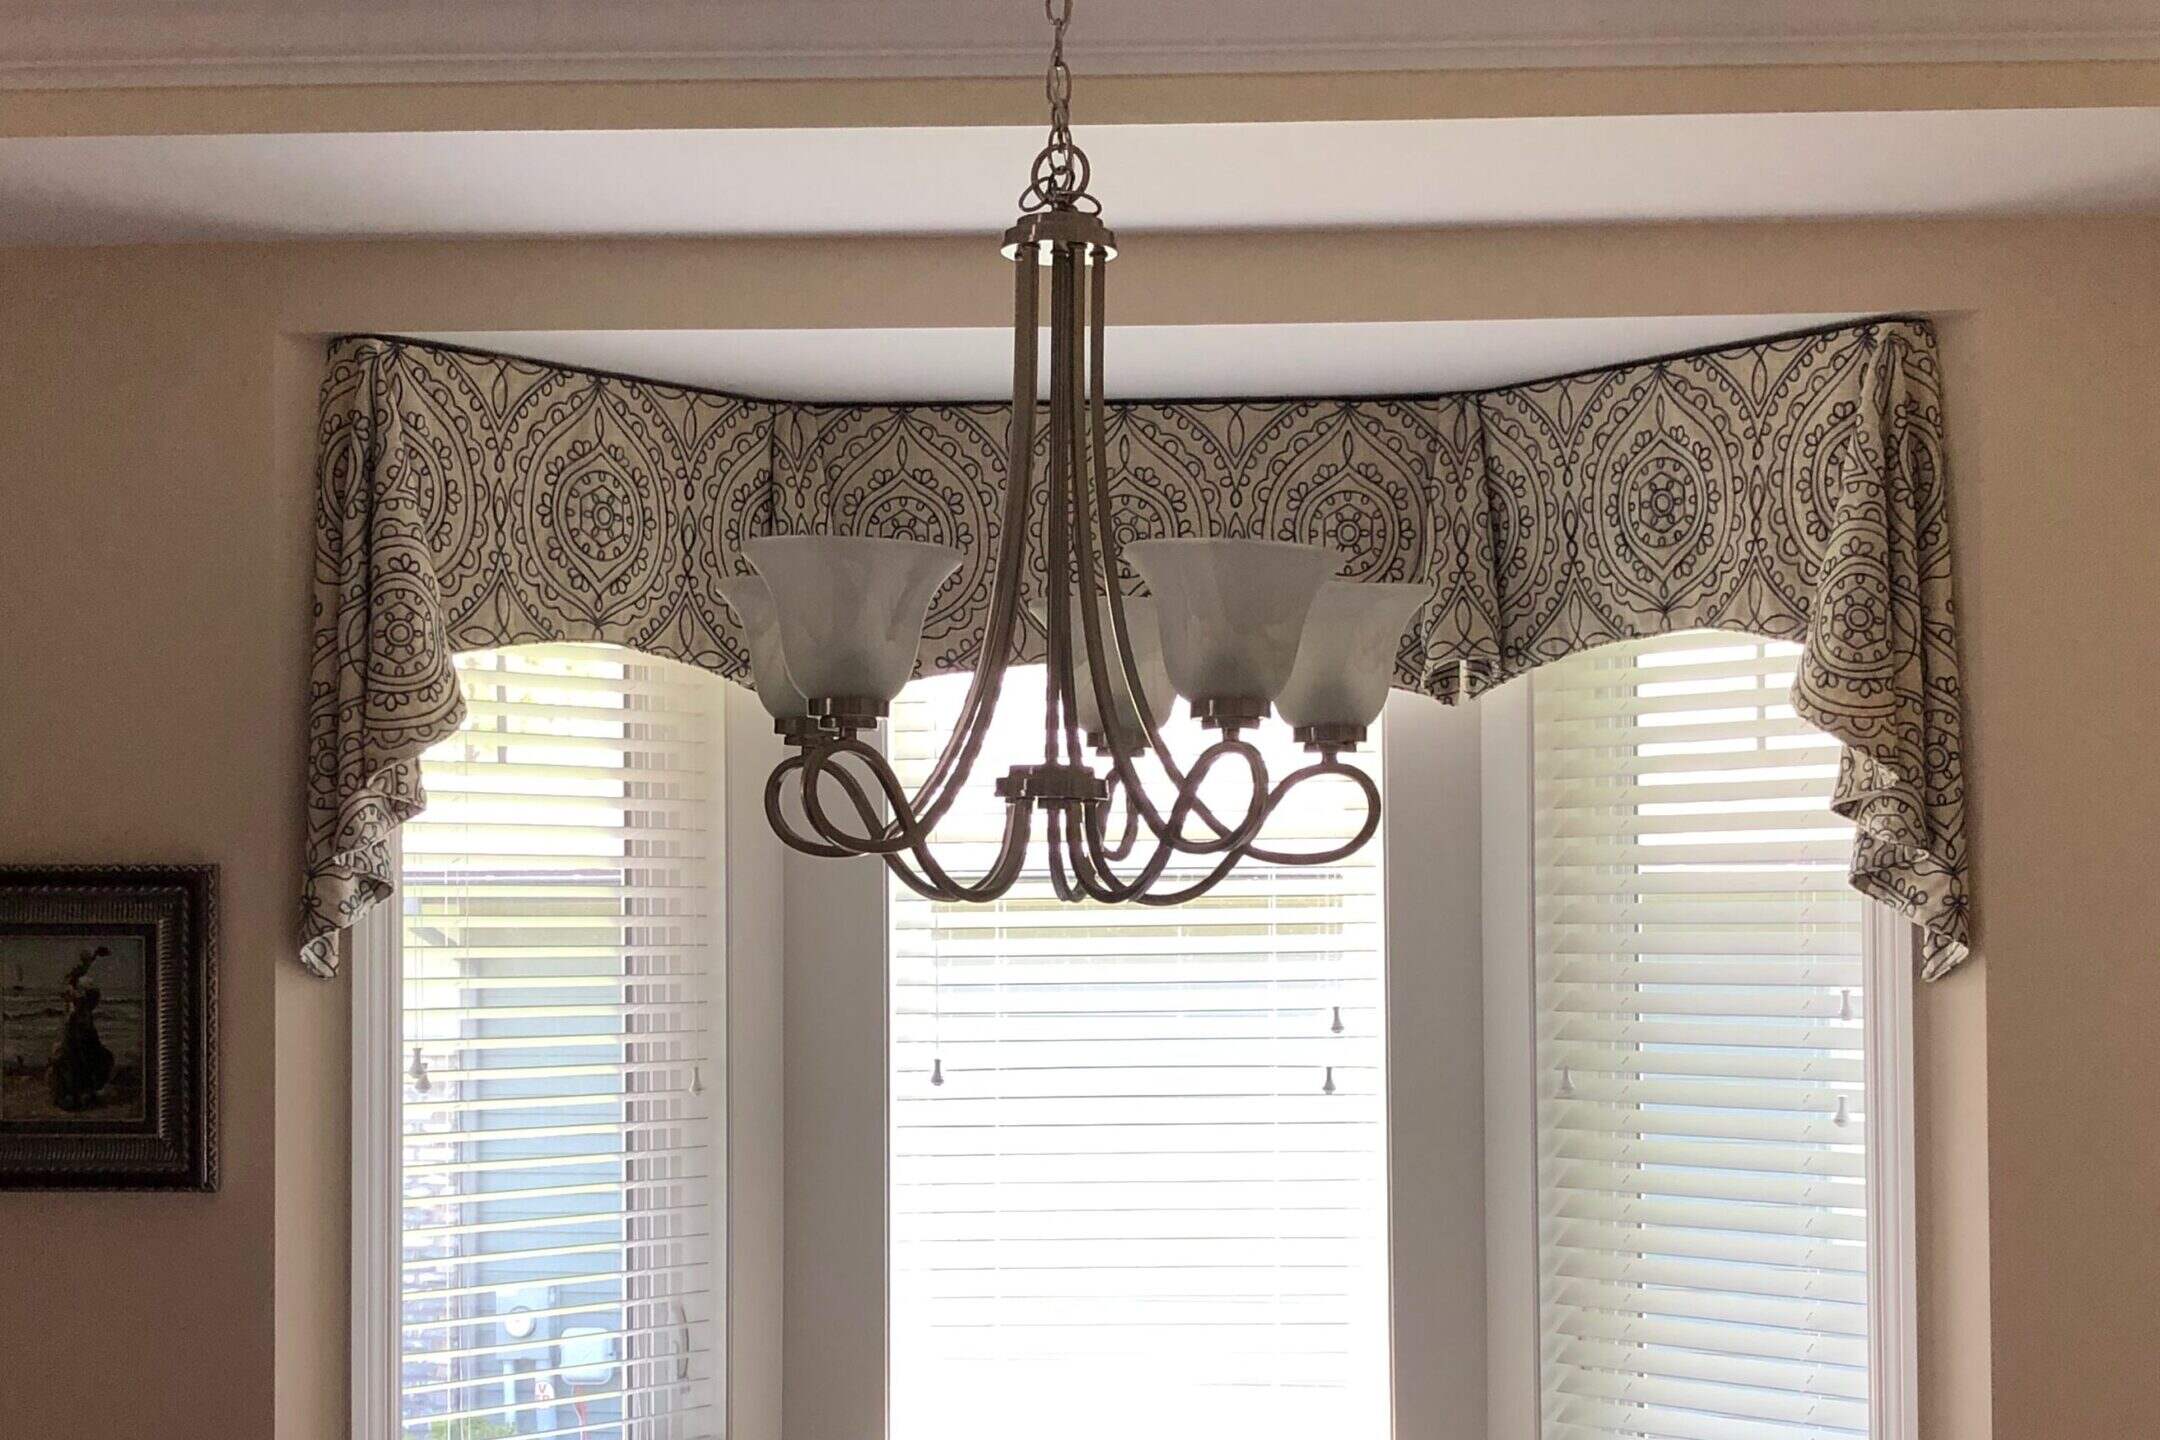 How To Hang A Valance Over Blinds